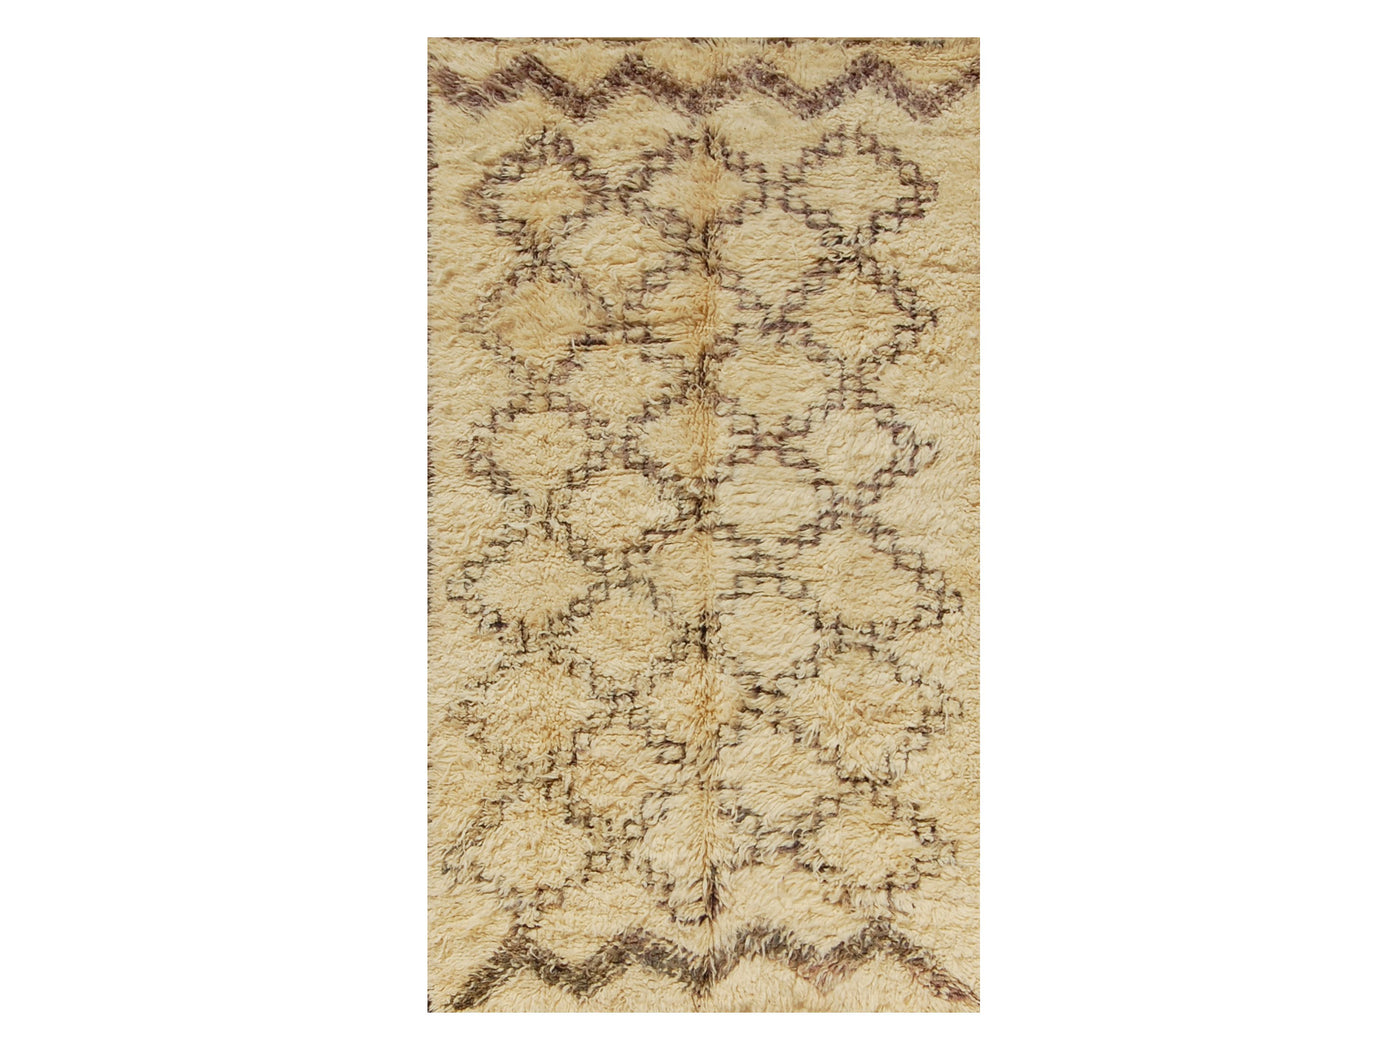 Vintage Moroccan Rug -  Misk Beni Ourain Morocco Collection